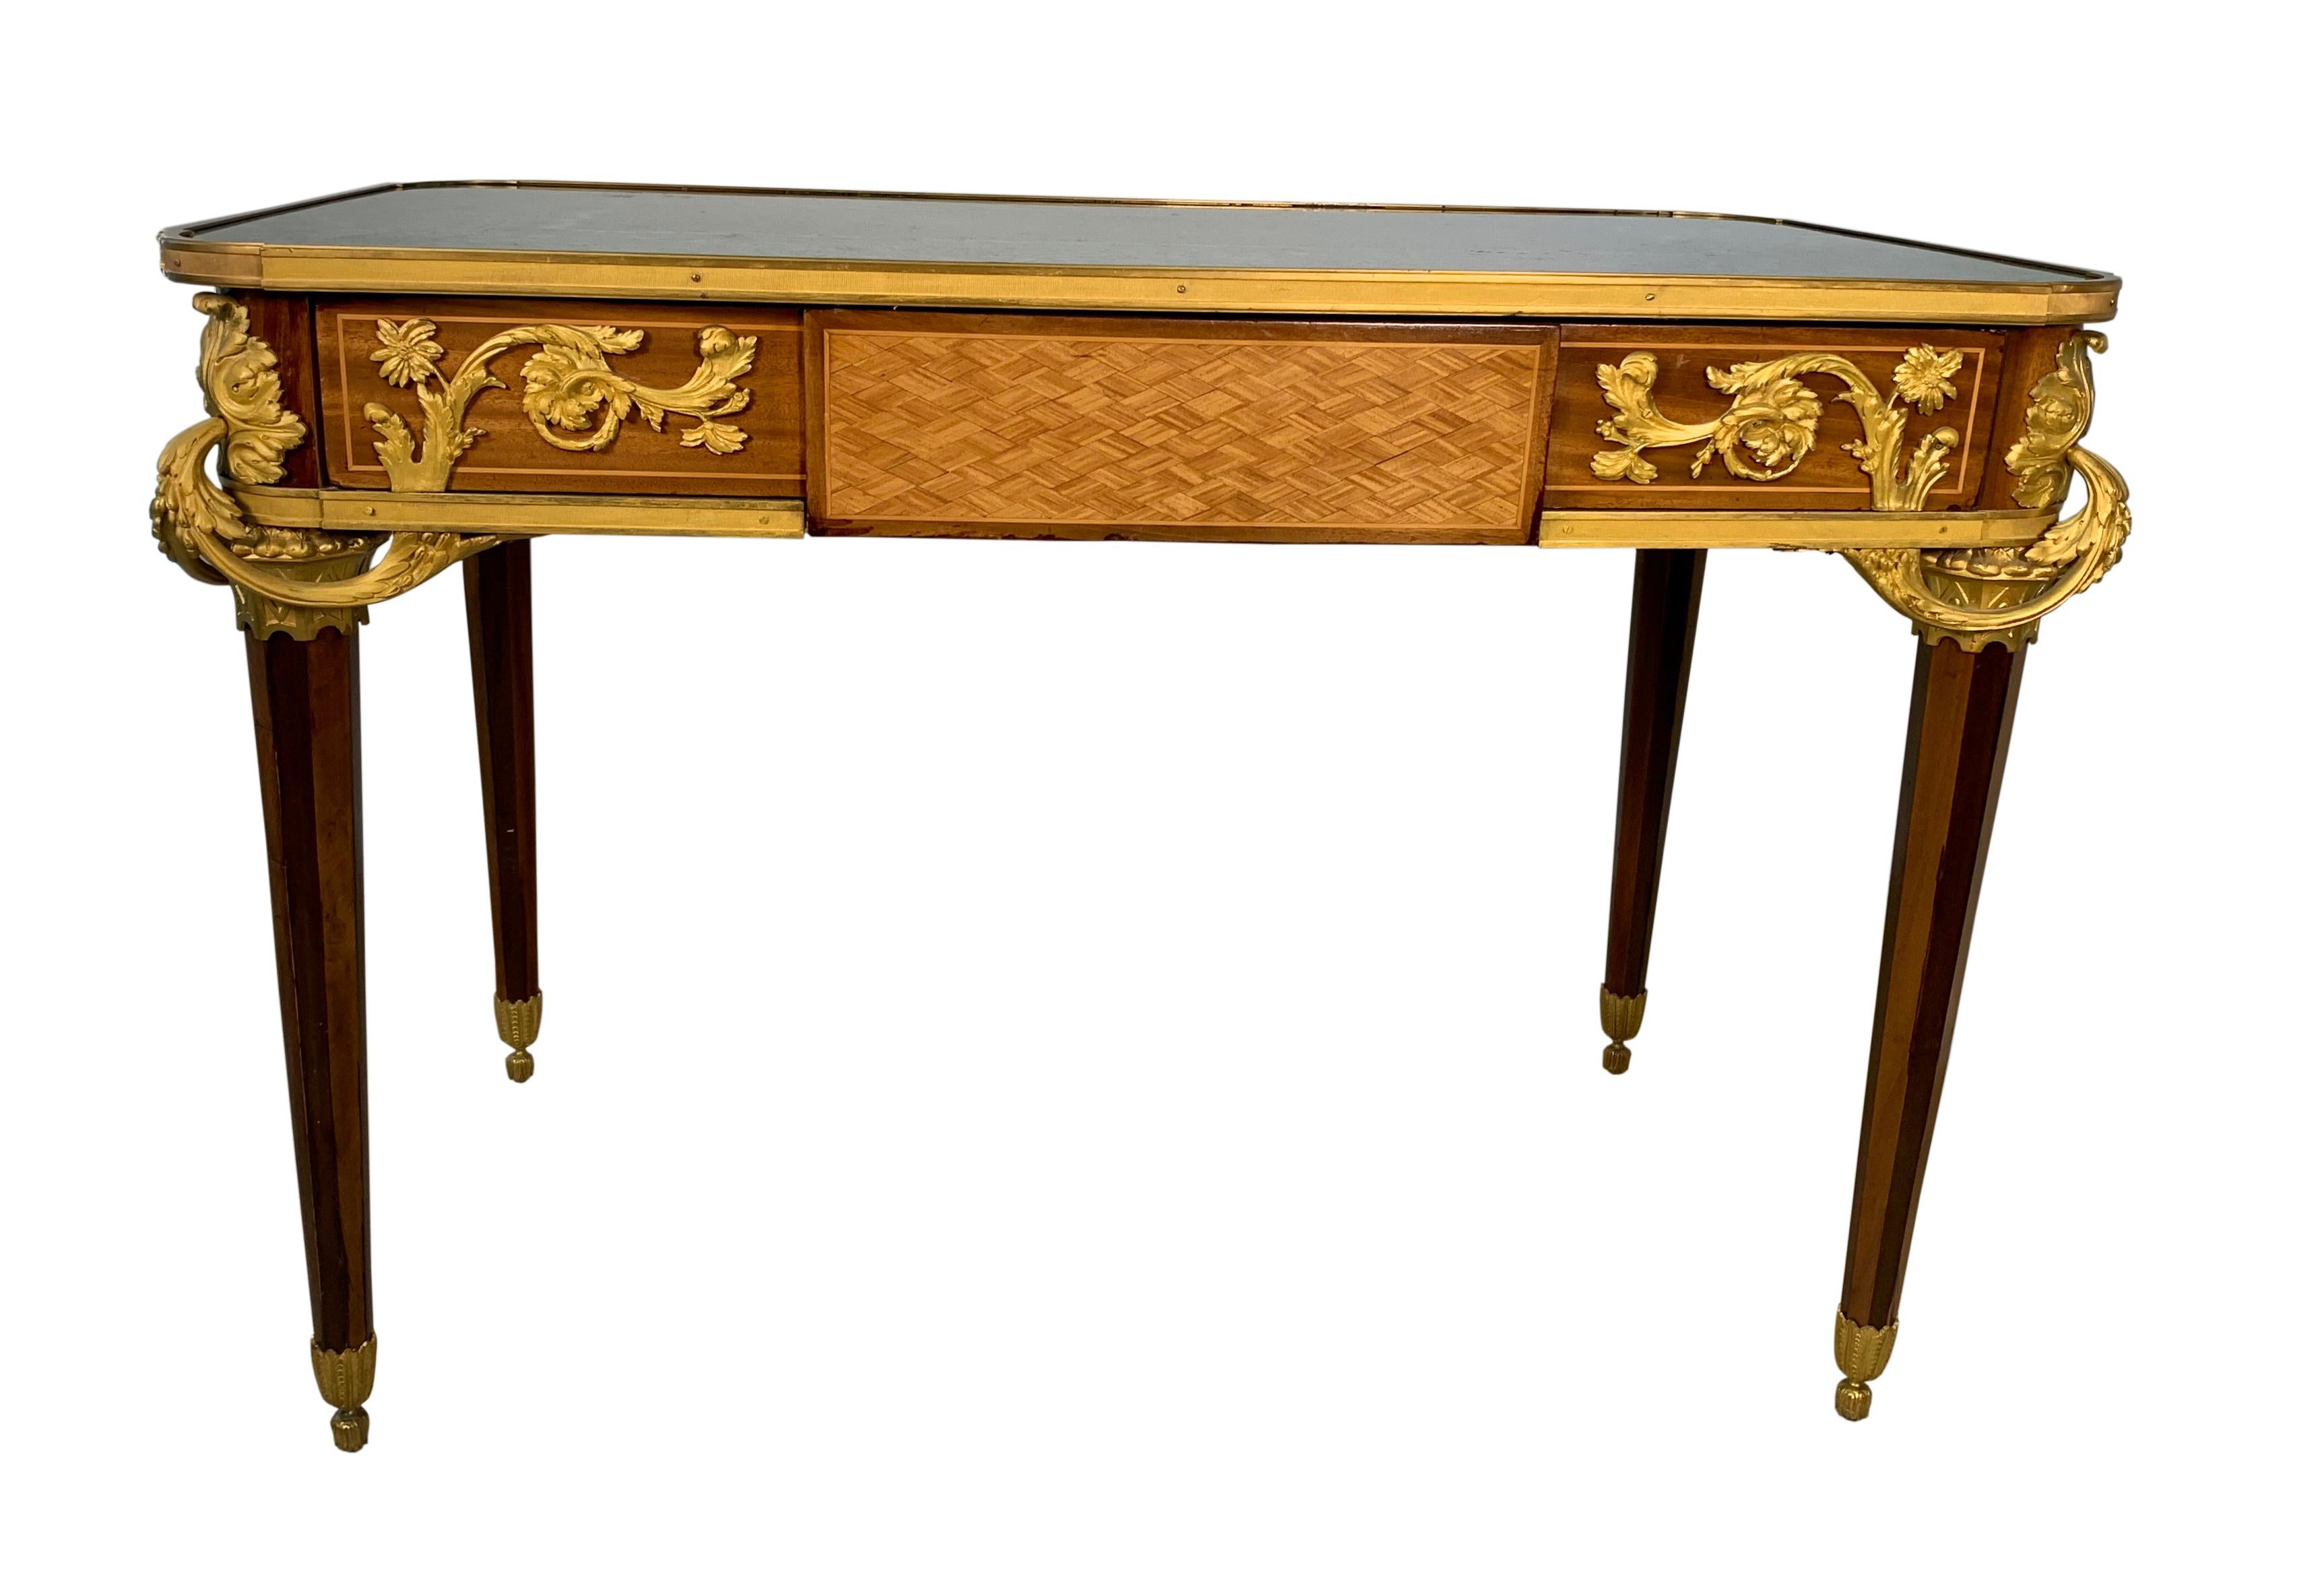 Antique French Ormolu Mounted Malachite Top Center Table / desk In Good Condition For Sale In Los Angeles, CA